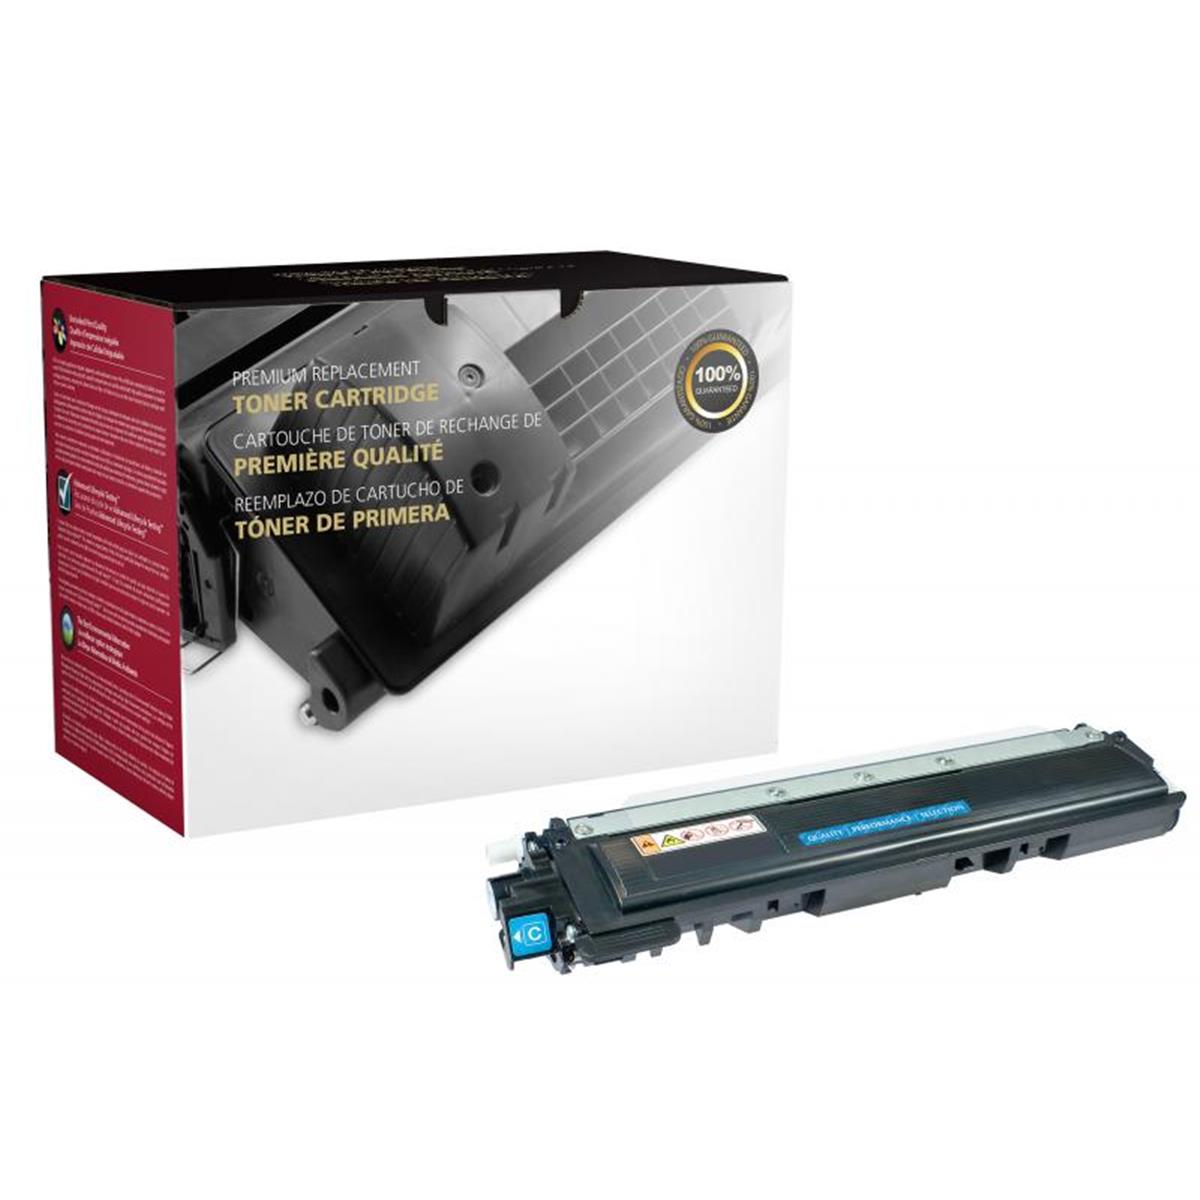 Picture of Brother 200470 Cyan Toner Cartridge for TN210